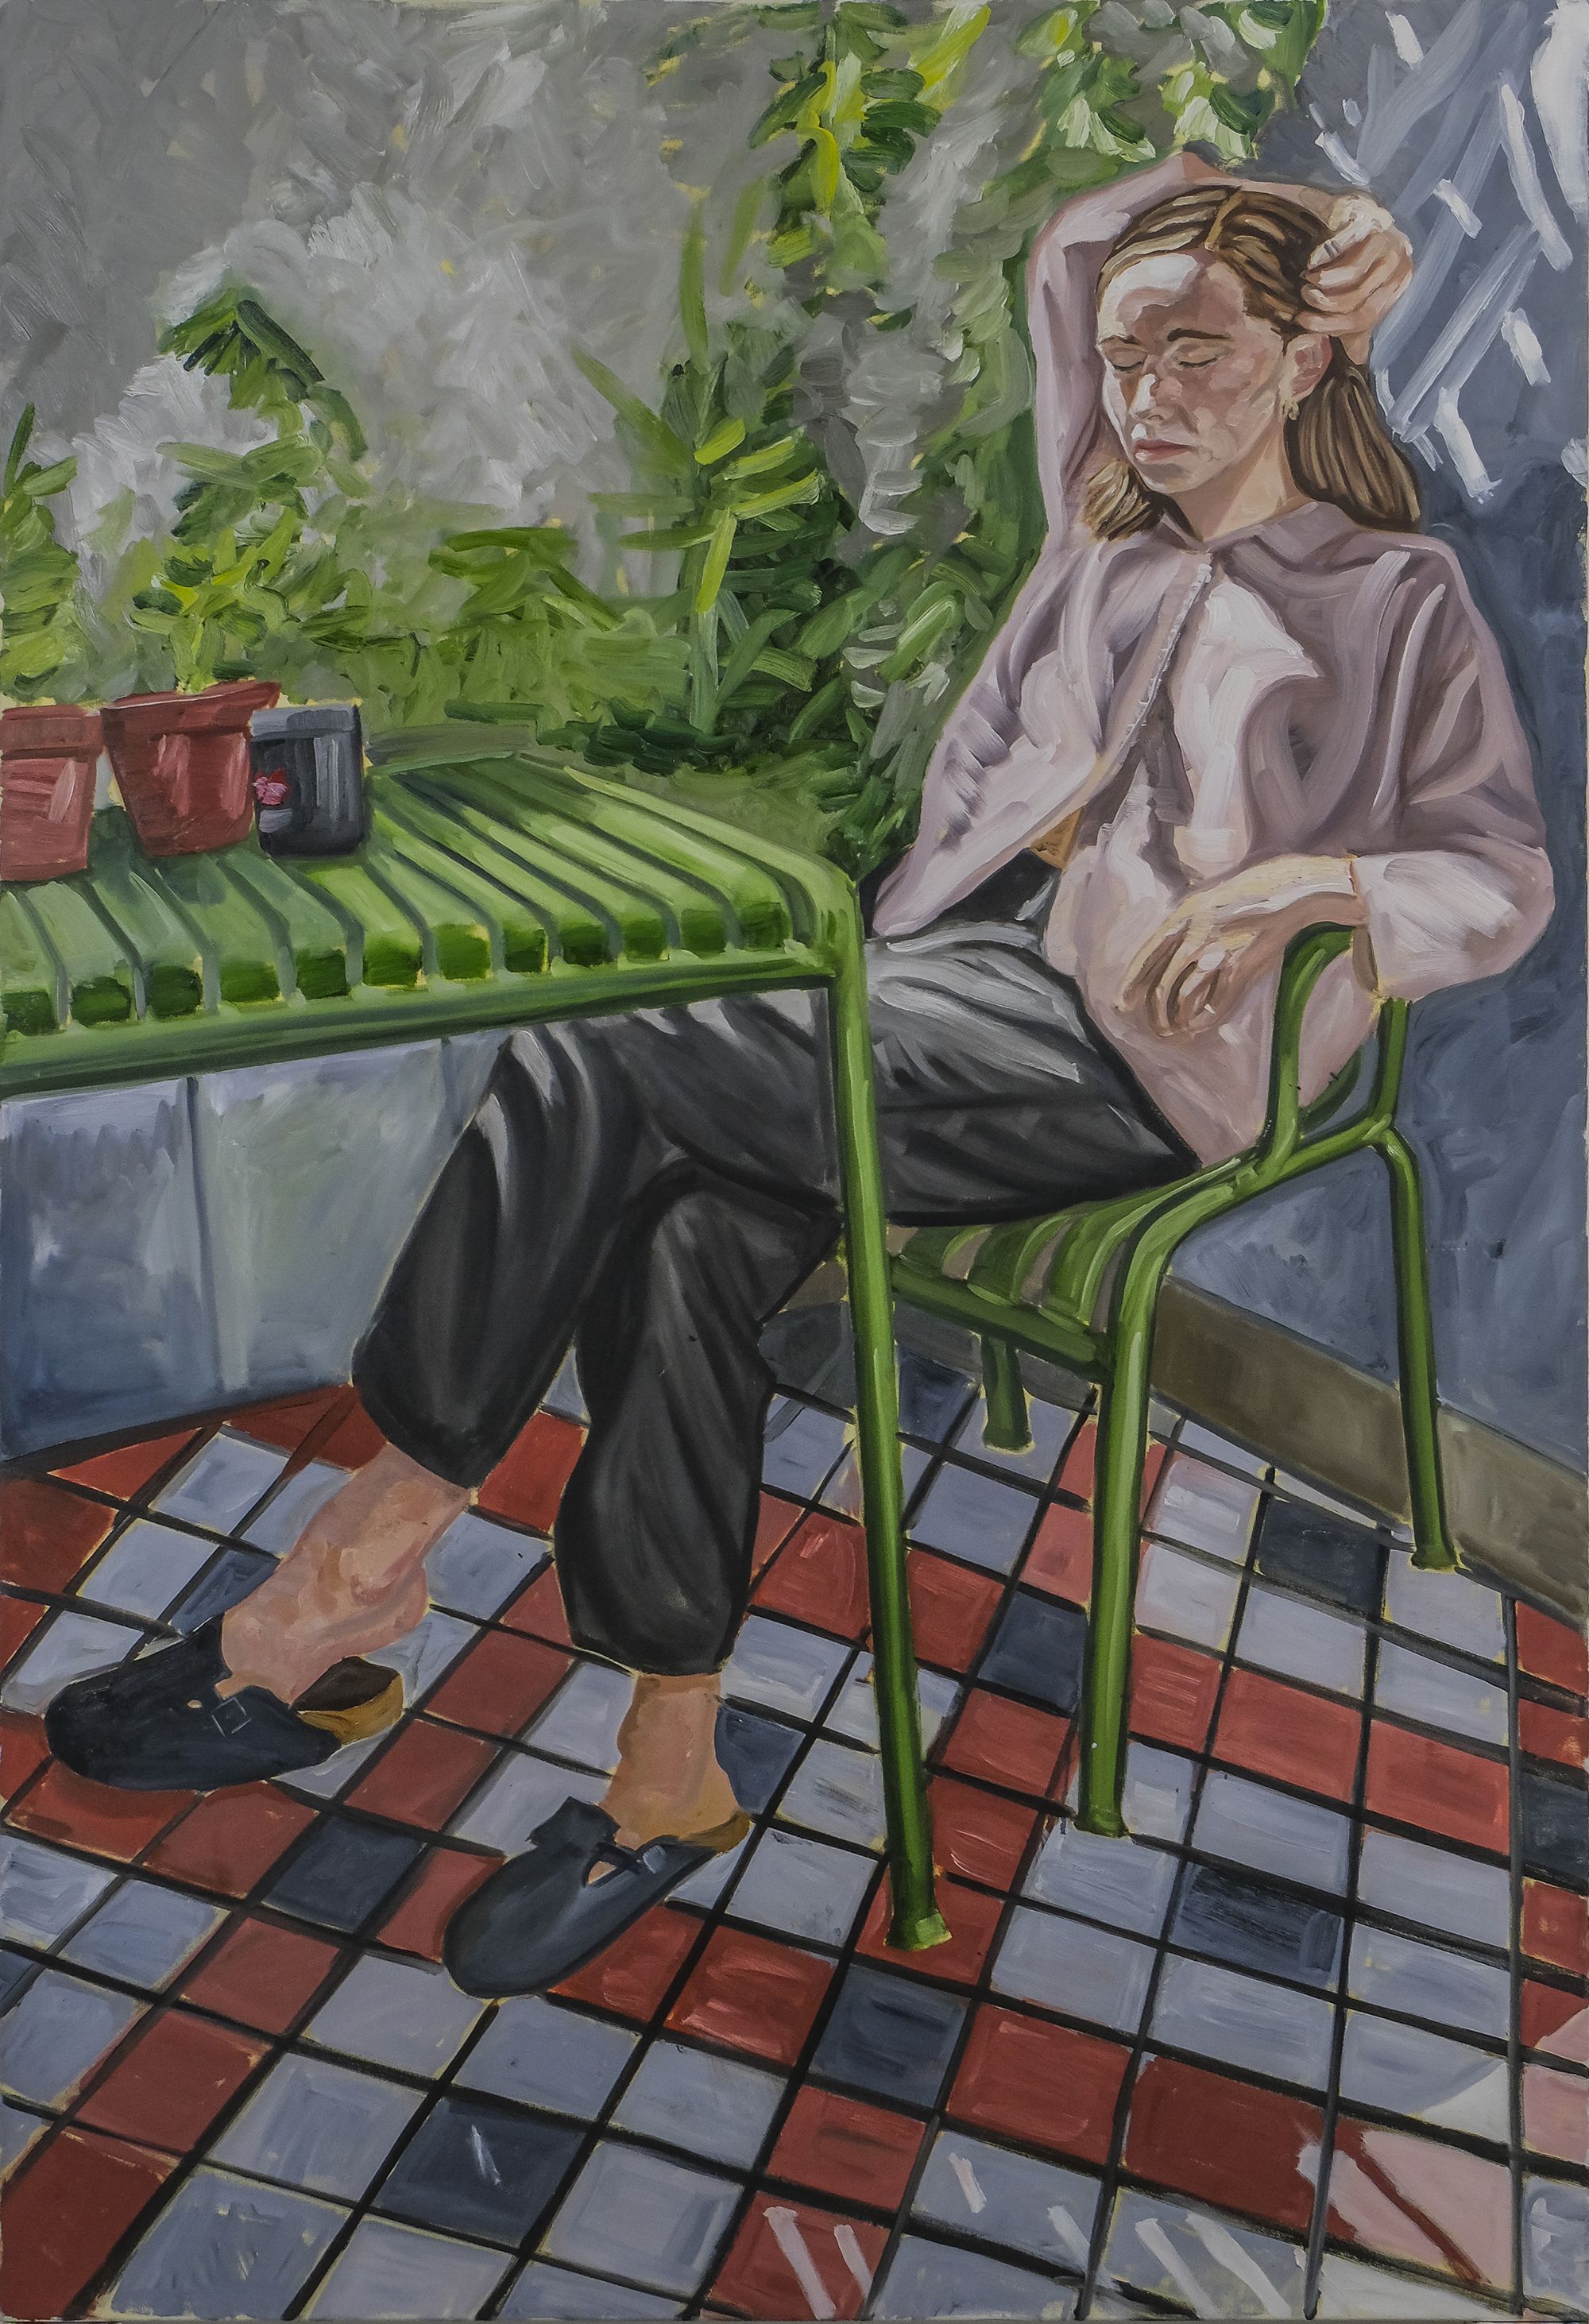 Painted portrait of a women sat outside on a green chair at a table. In a garden setting, surrounded by plants. The women’s eyes are closed, she is lifting her hand up to touch her blonde hair. 